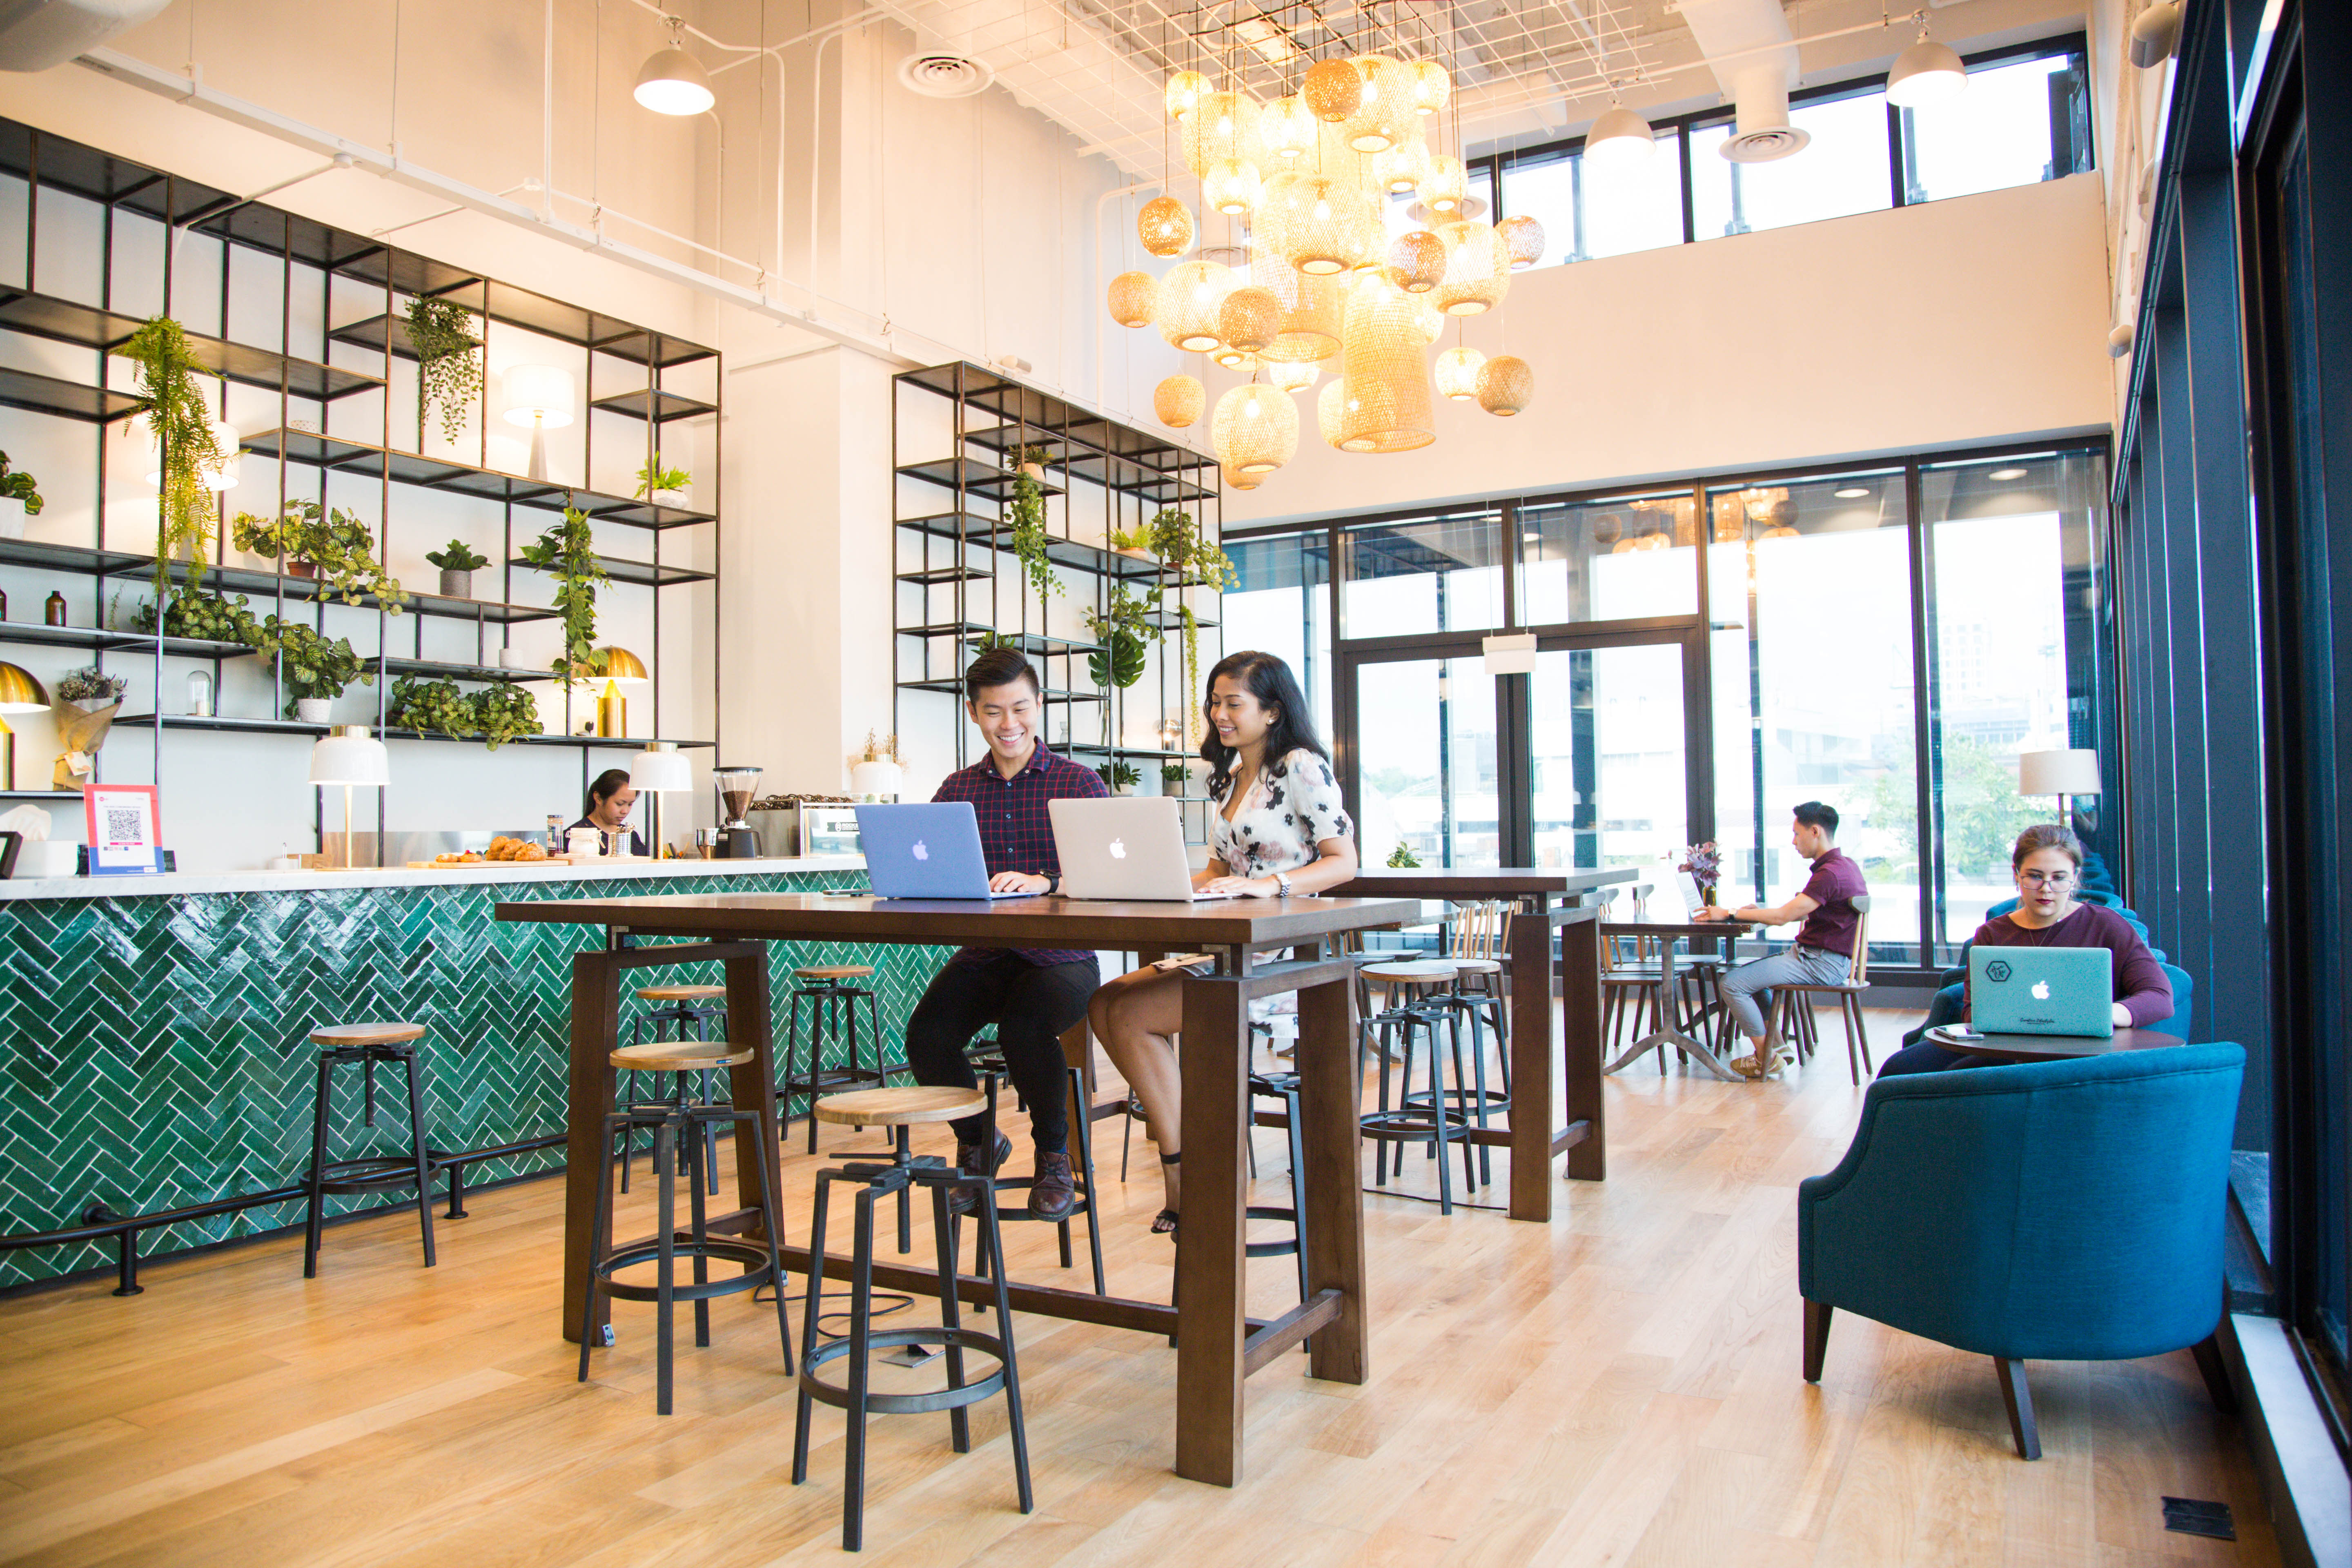 The Flexi Group Launches as the Largest Operator of Flexible Workspaces in Asia-Pacific